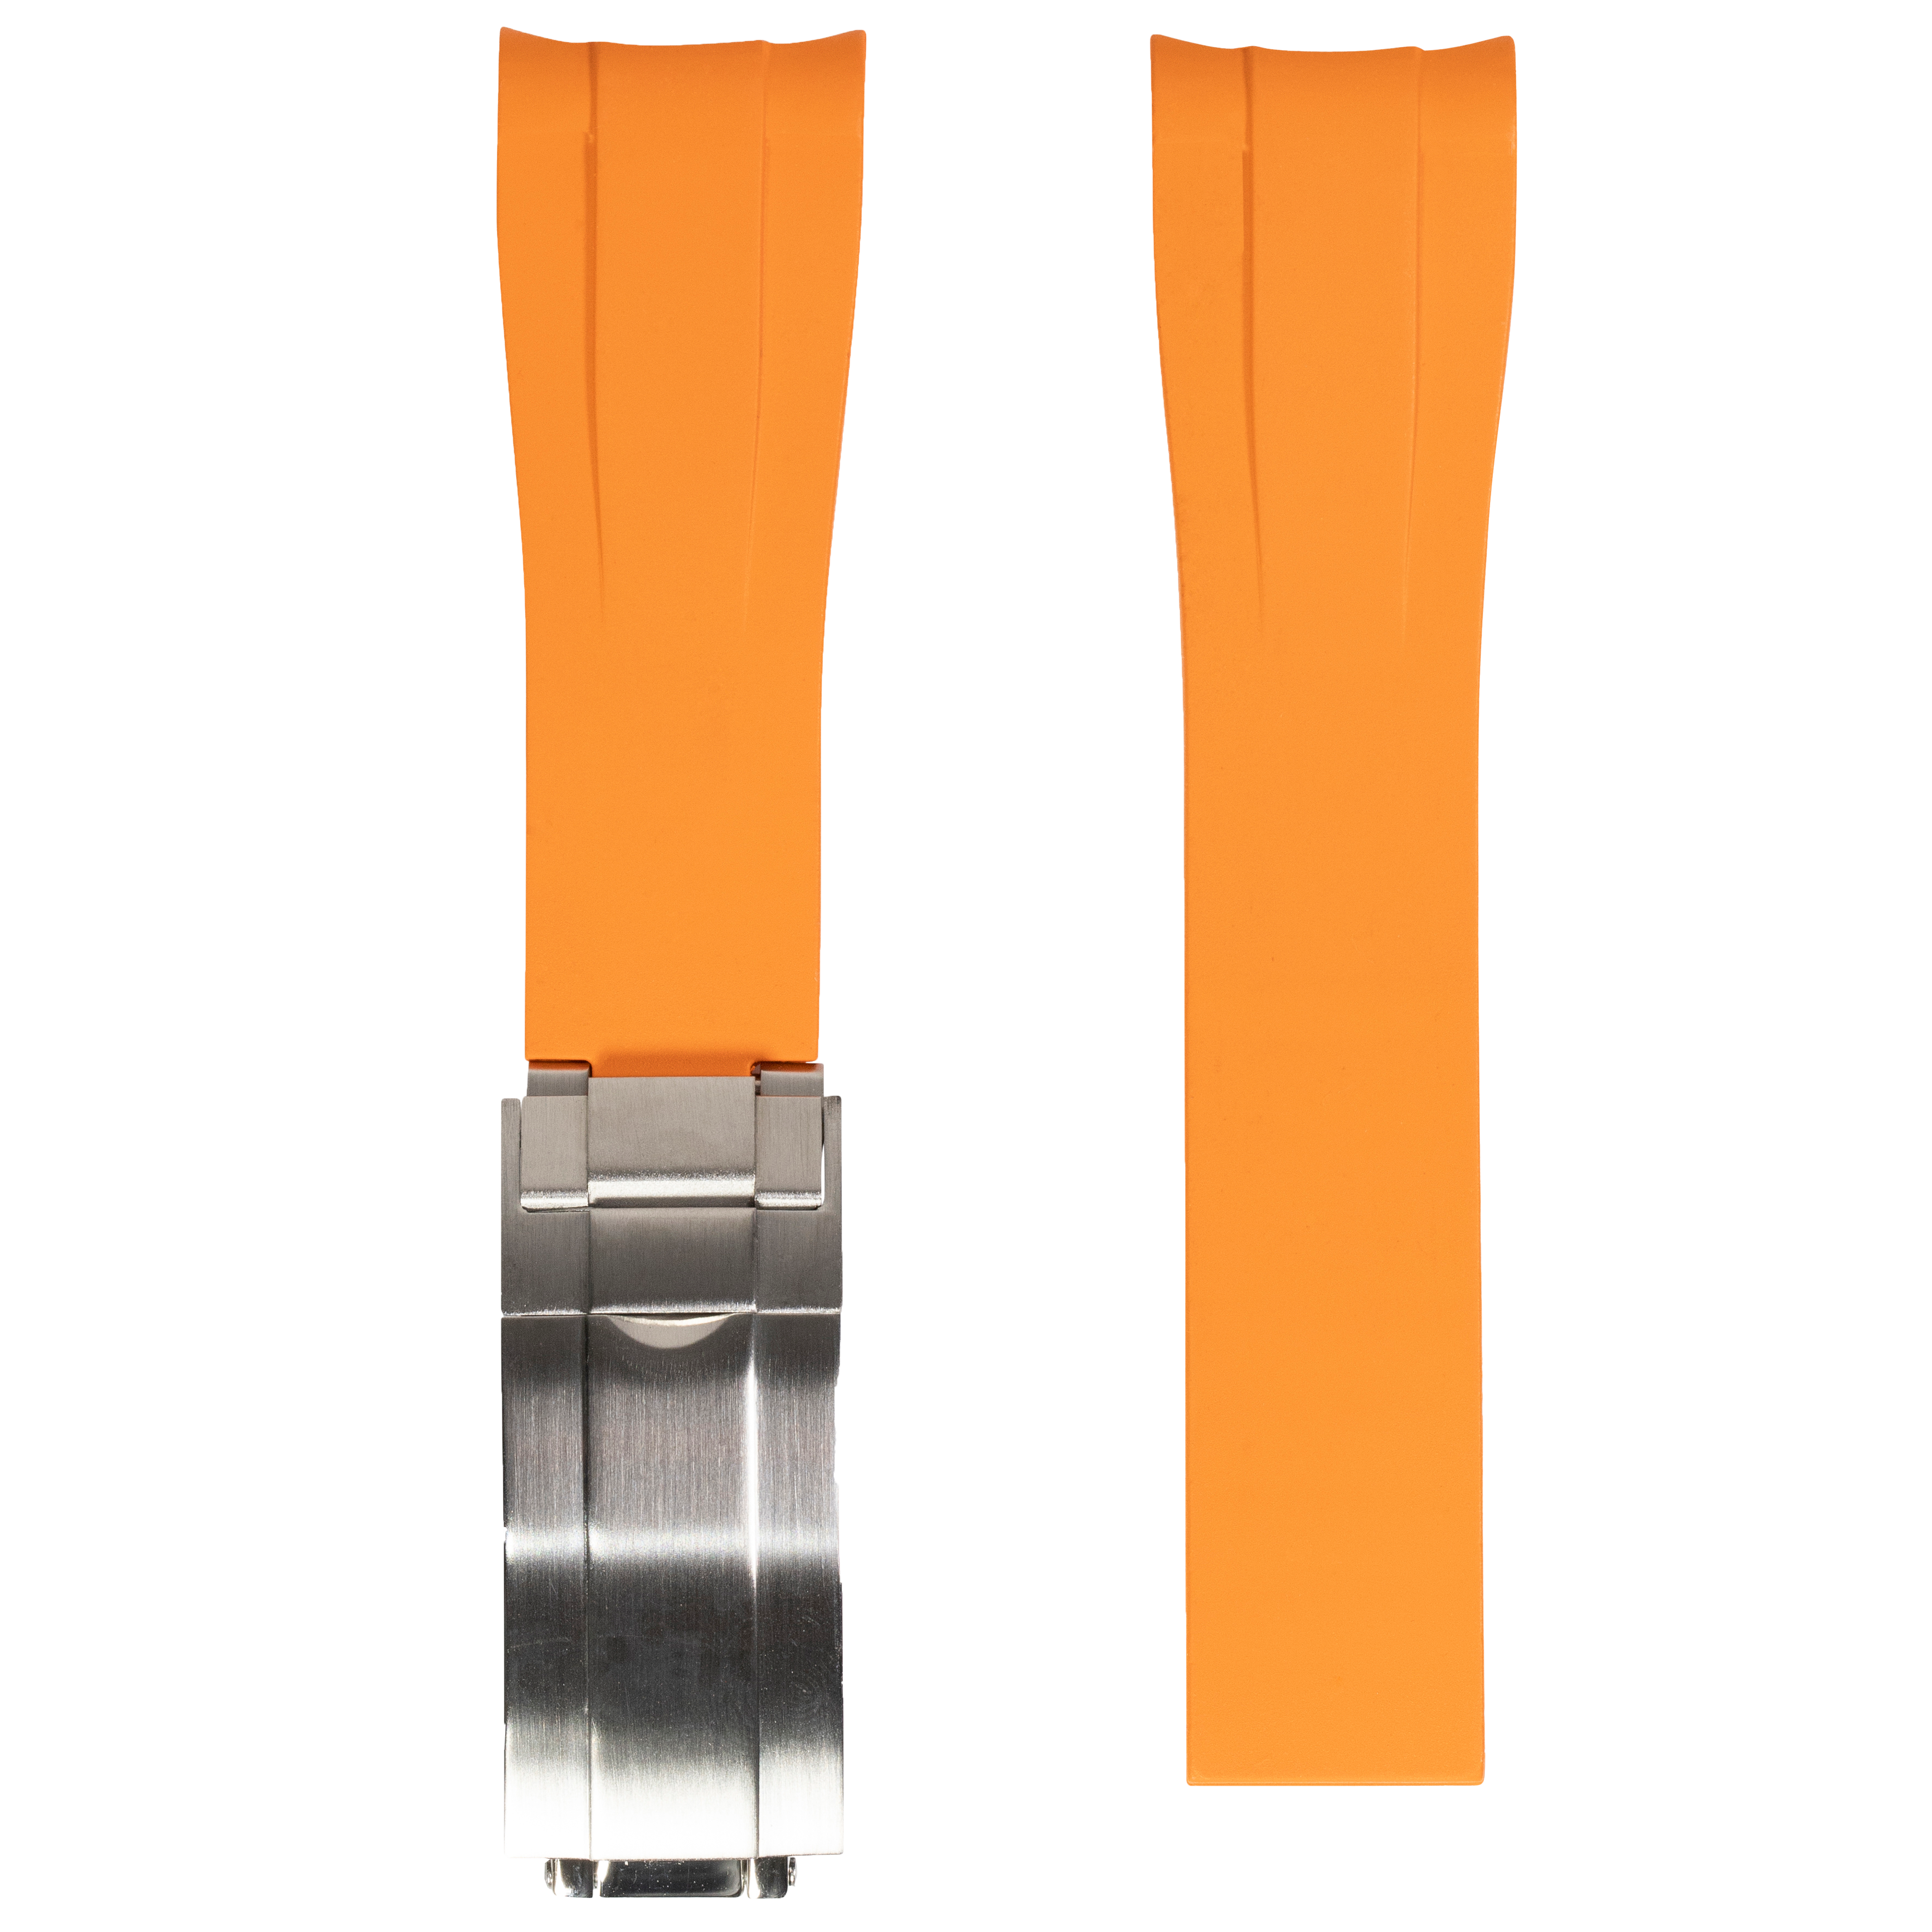 [Rolex Only] Vulcanised Rubber with Oyster Clasp  - Orange